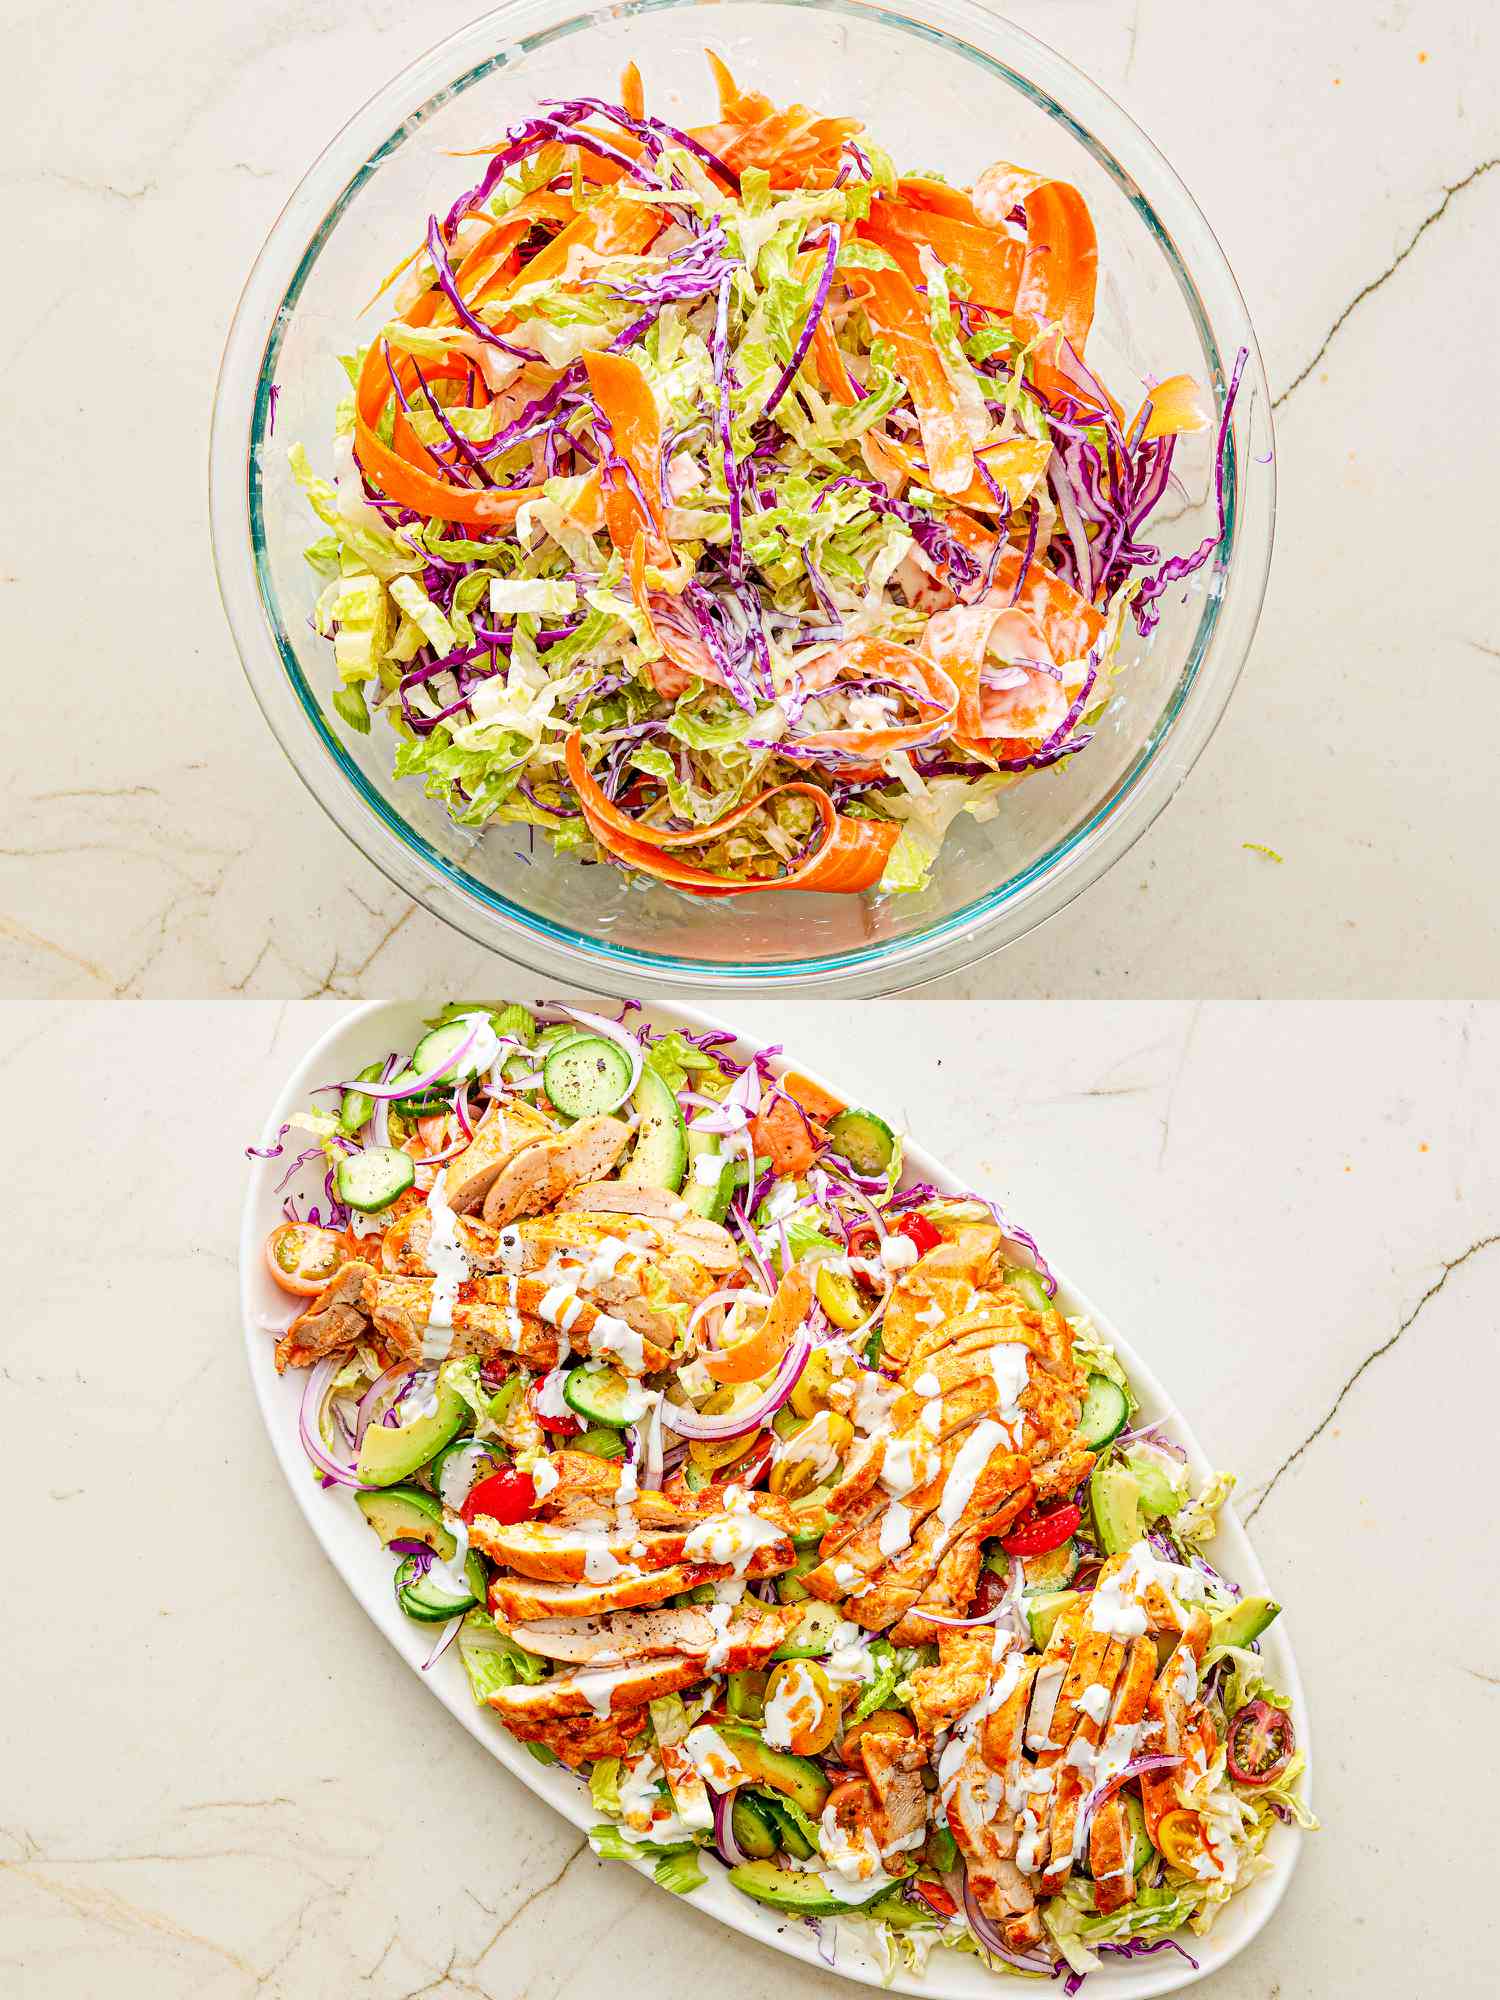 Two image collage of assembling the salad